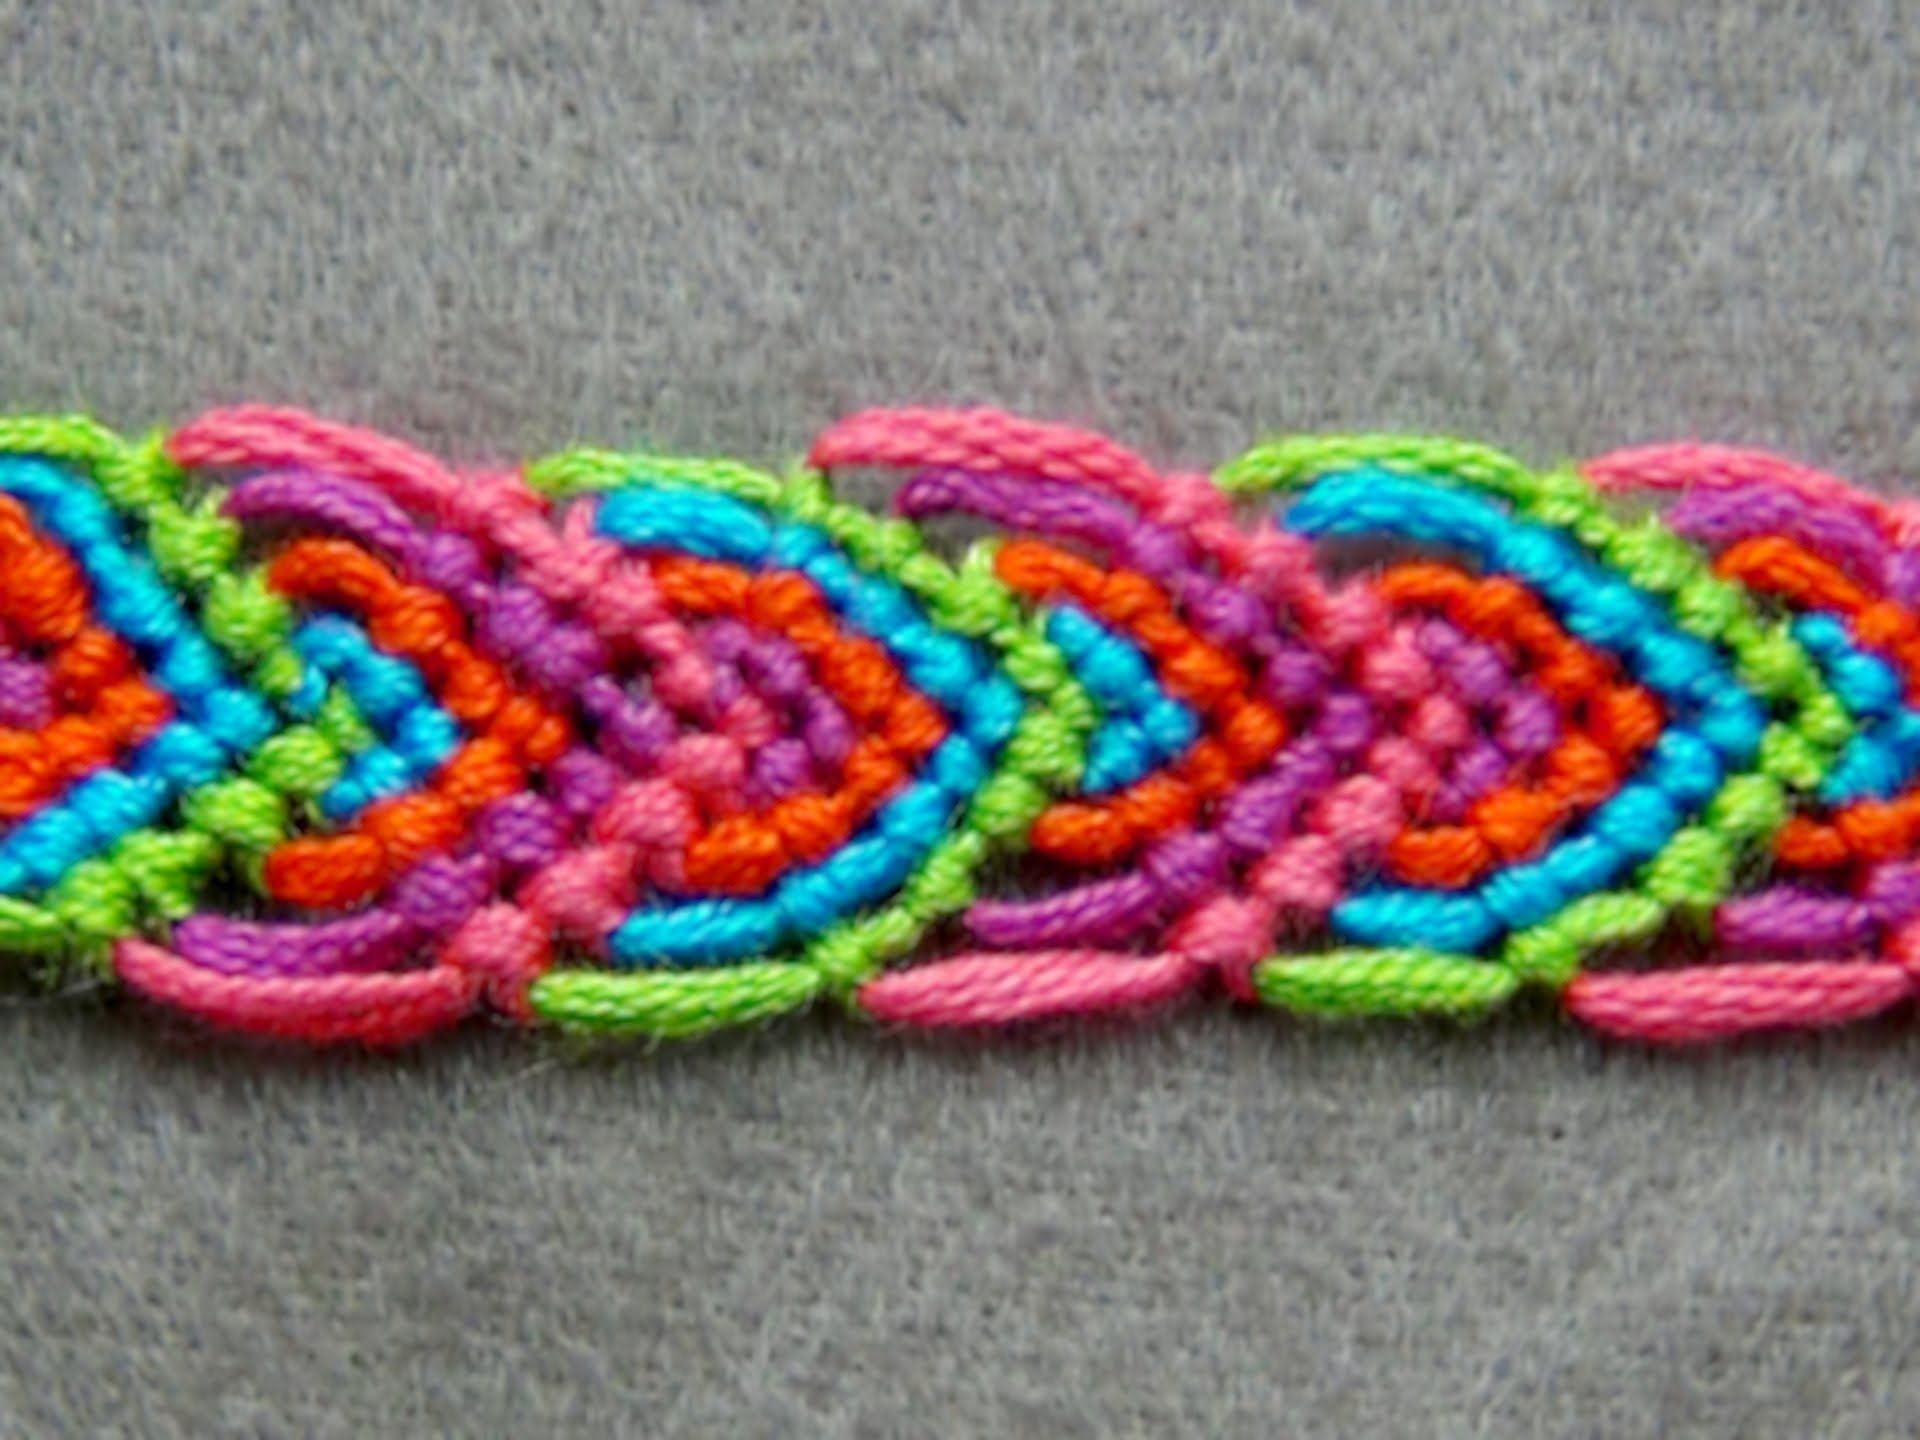 friendship bracelet instructions with pictures